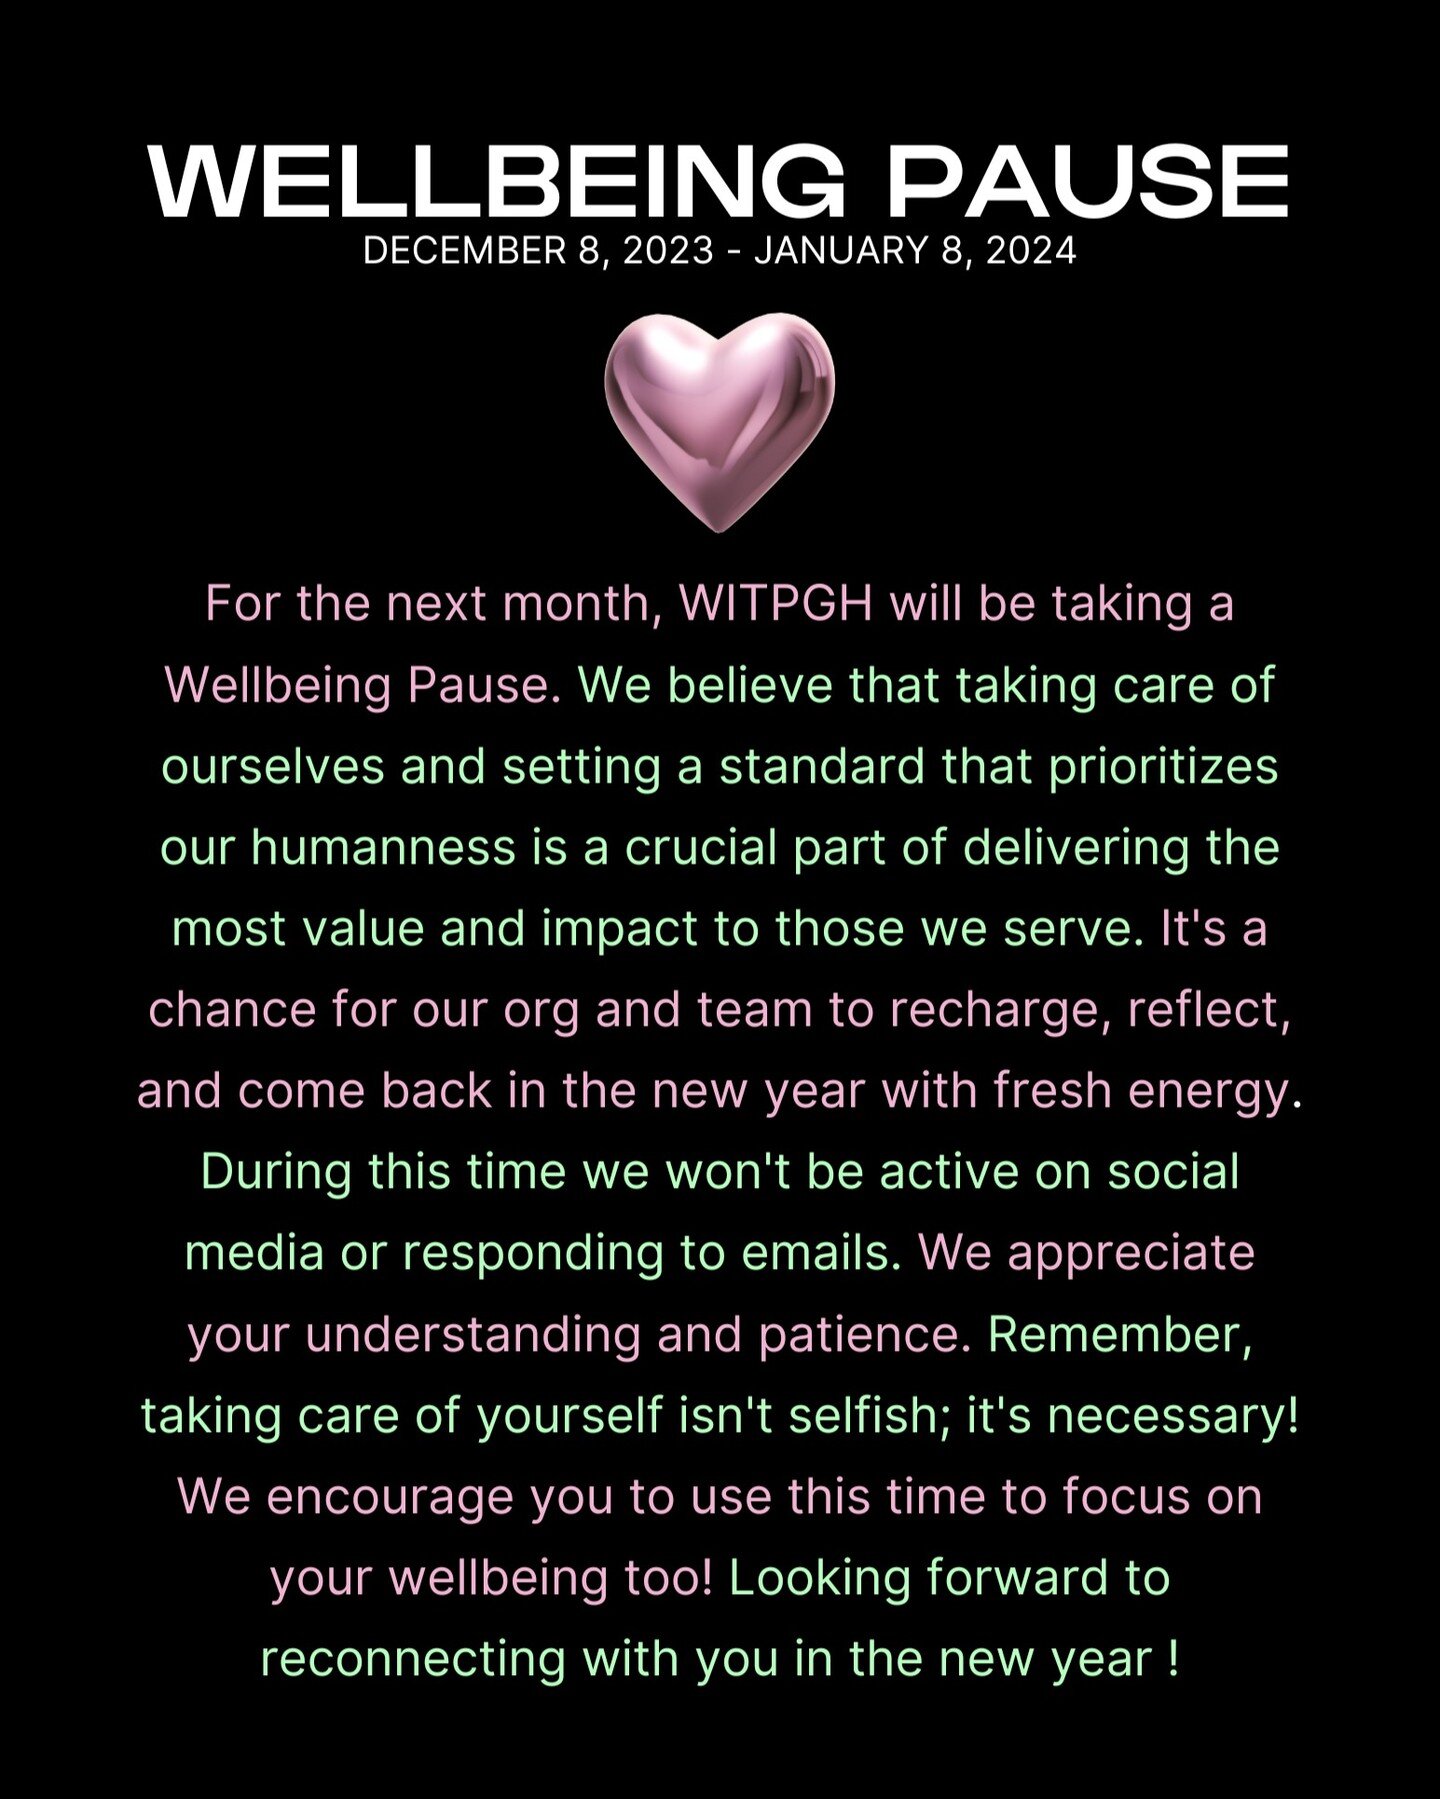 See you next year! 🌱✨
--
--
--
&quot;For the next month, WITPGH will be taking a Wellbeing Pause. We believe that taking care of ourselves and setting a standard that prioritizes our humanness is a crucial part of delivering the most value and impac